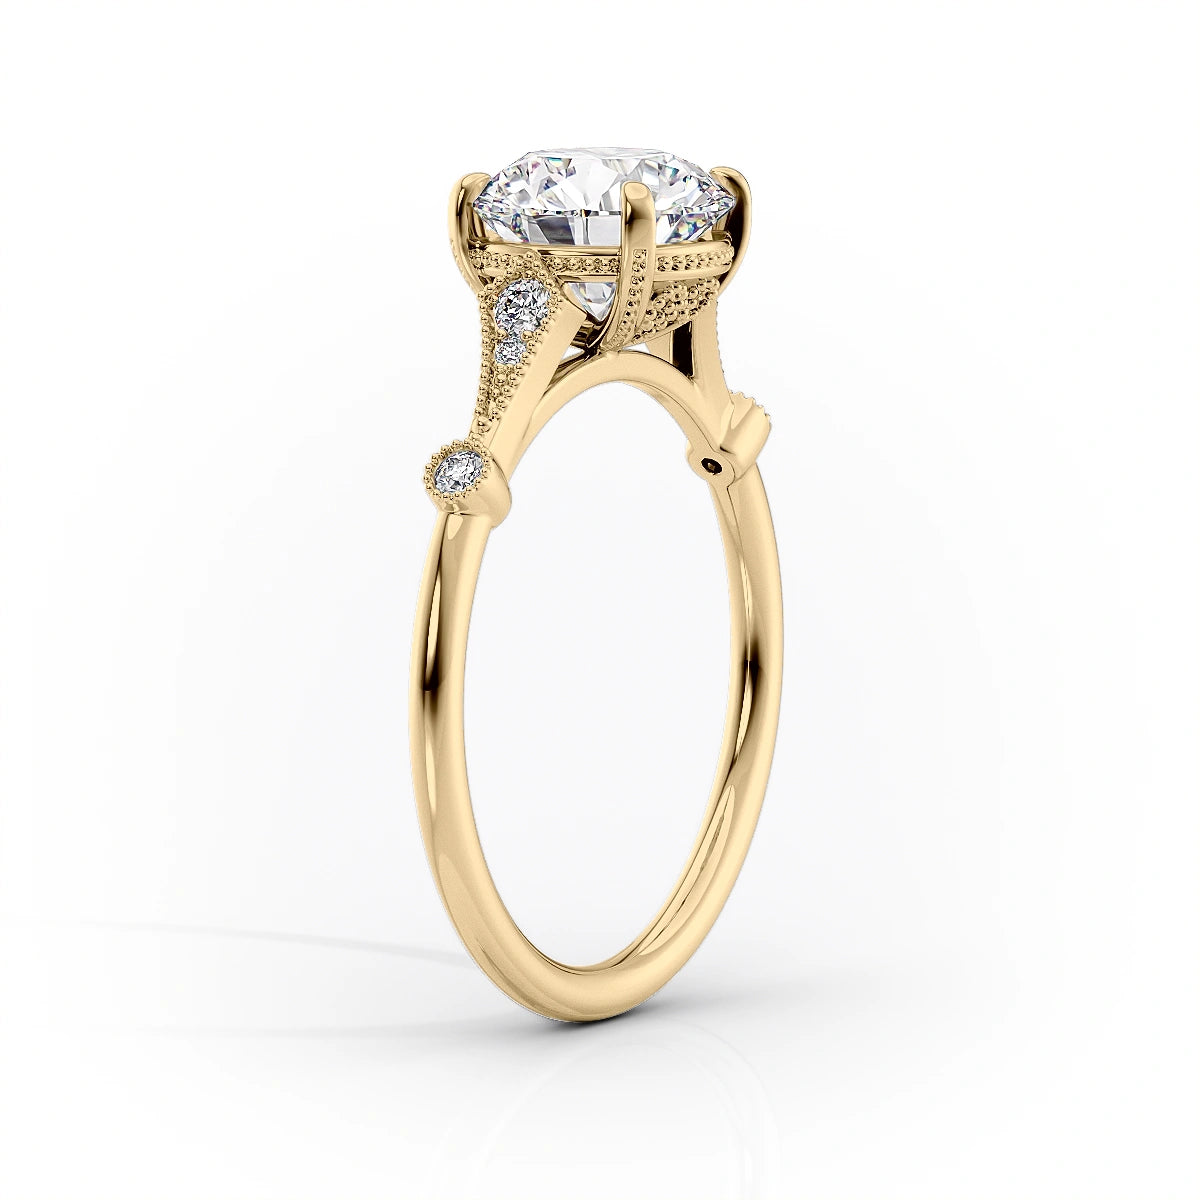 17 Unique Engagement Rings That Might Make You Rethink Your Mood Board |  Glamour UK